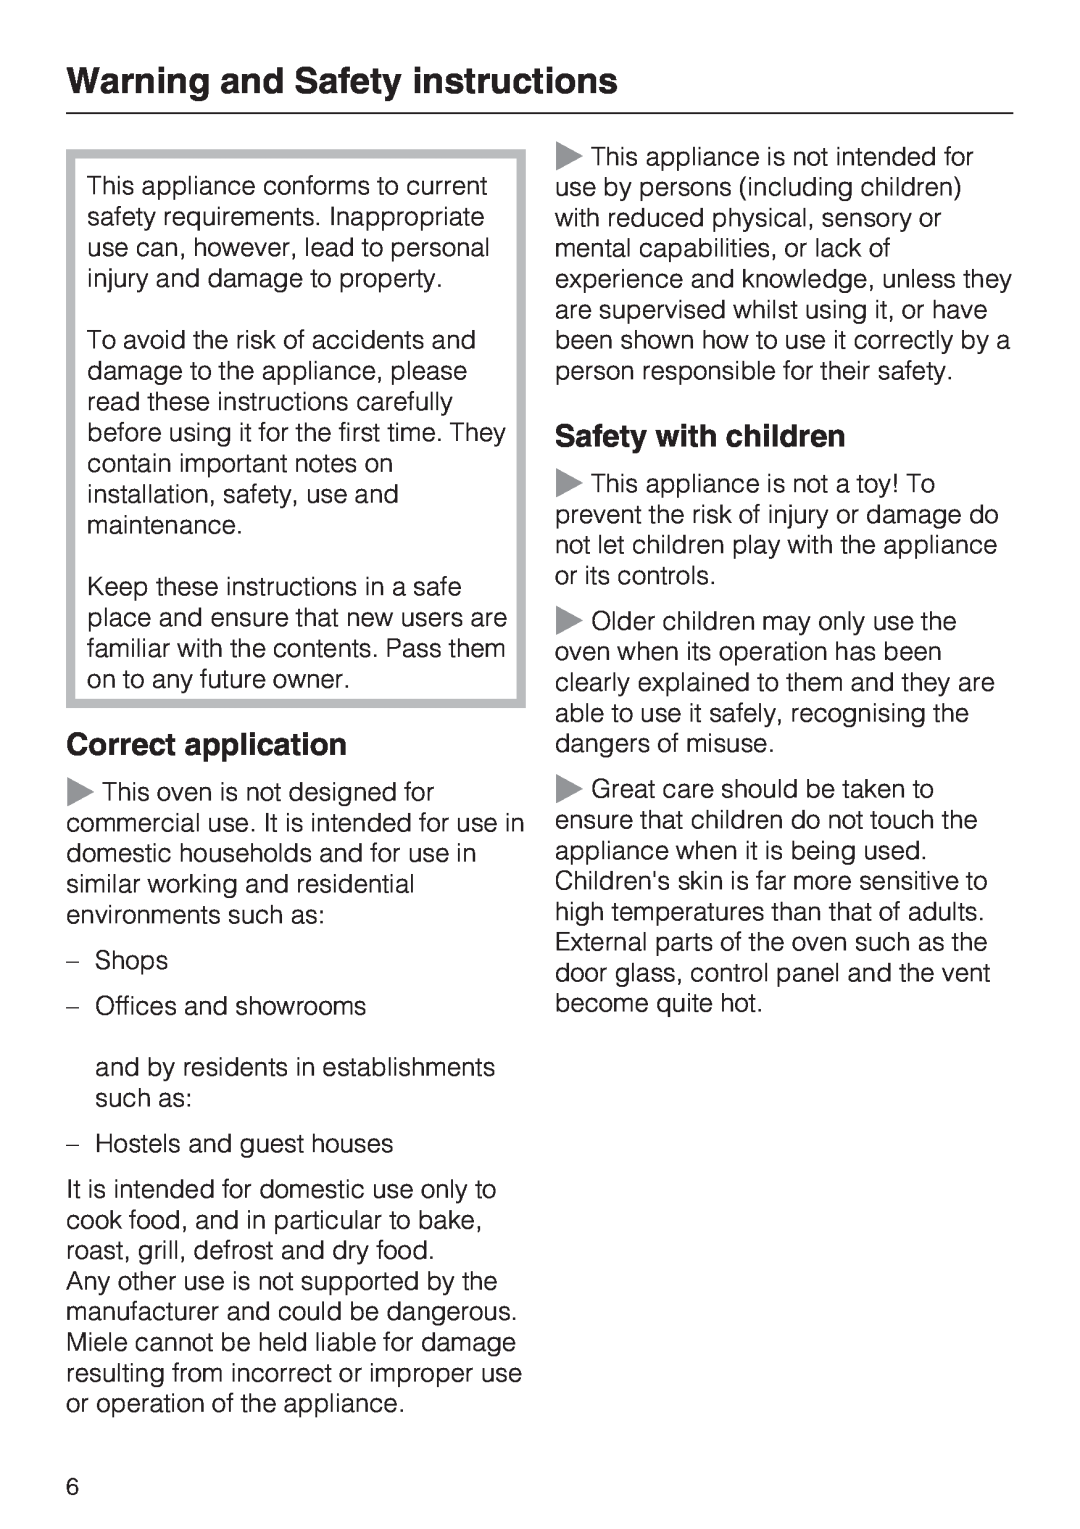 Miele H 5961 B installation instructions Warning and Safety instructions, Correct application, Safety with children 